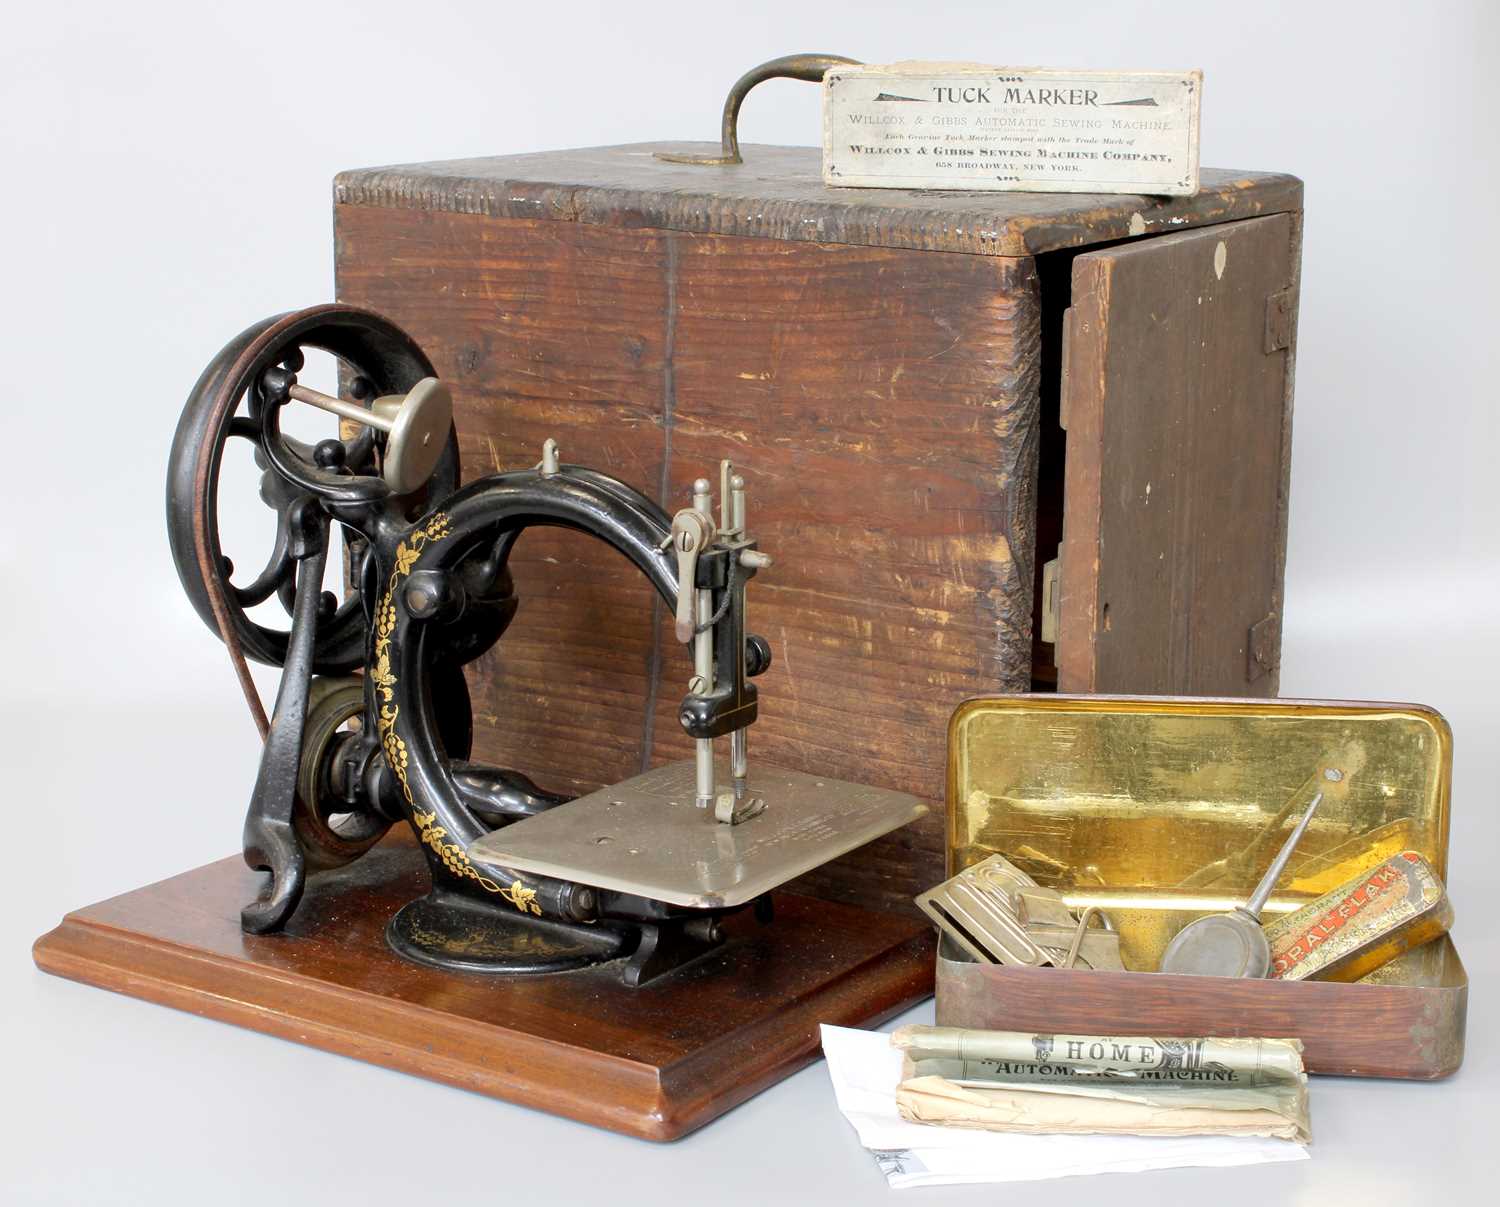 A Victorian Willcox & Gibbs Sewing Machine, and accessories